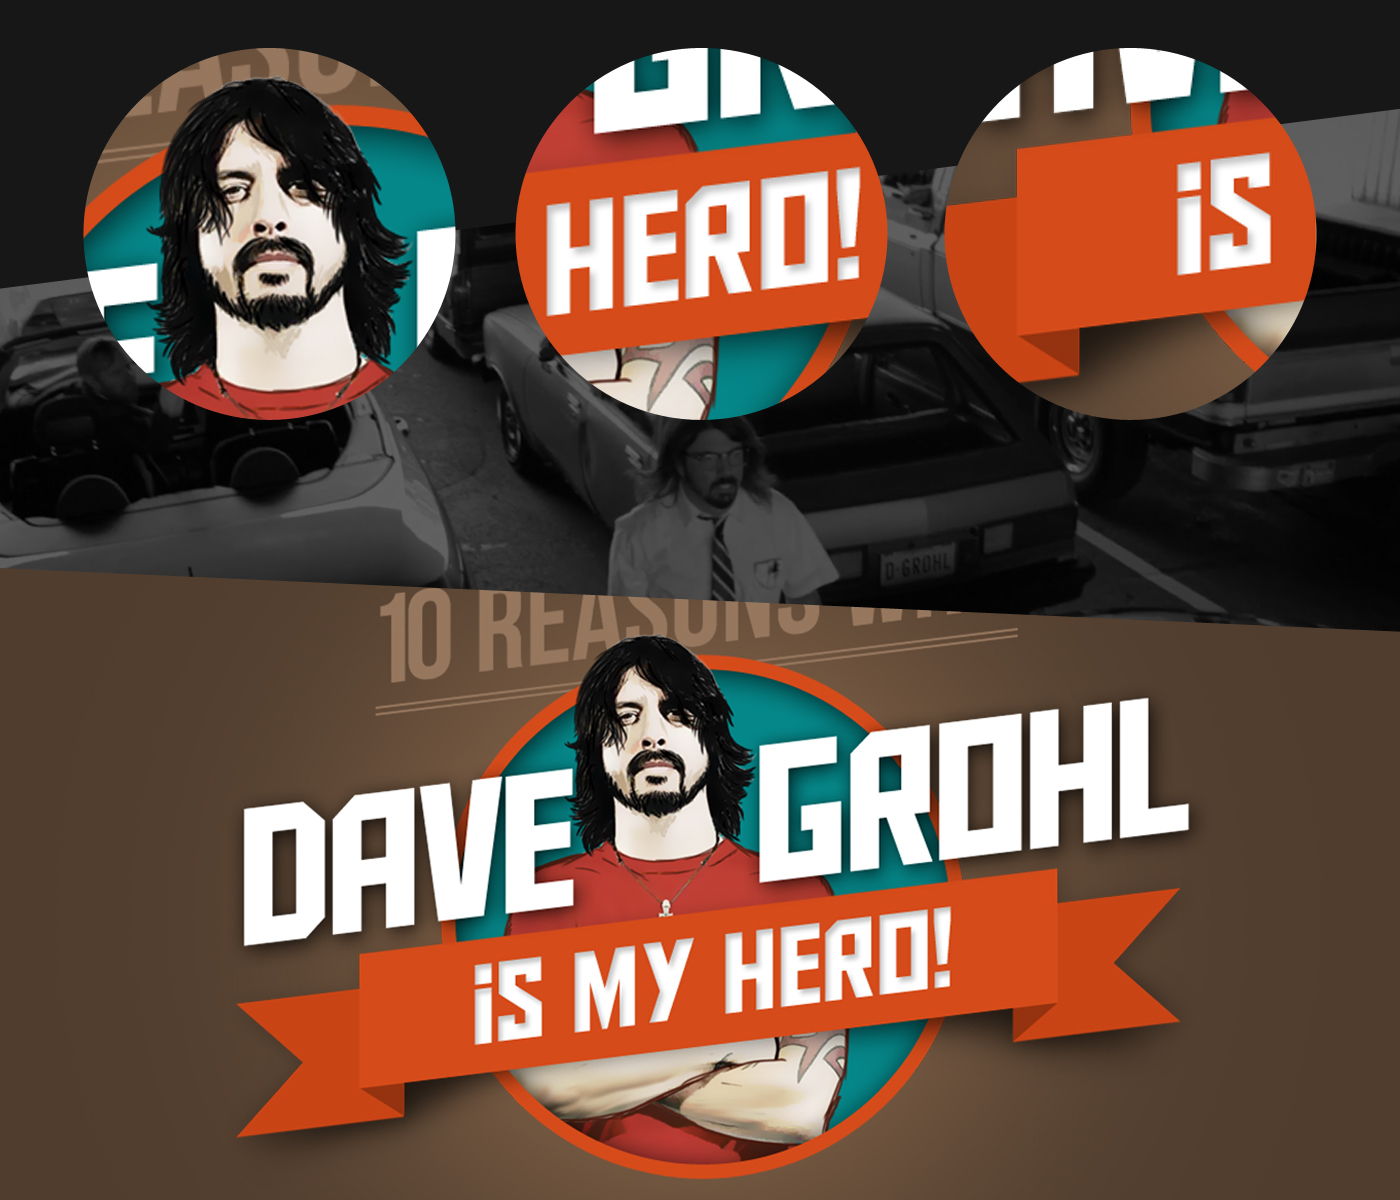 Dave Grohl foo fighters infographic art rock band fan My hero design